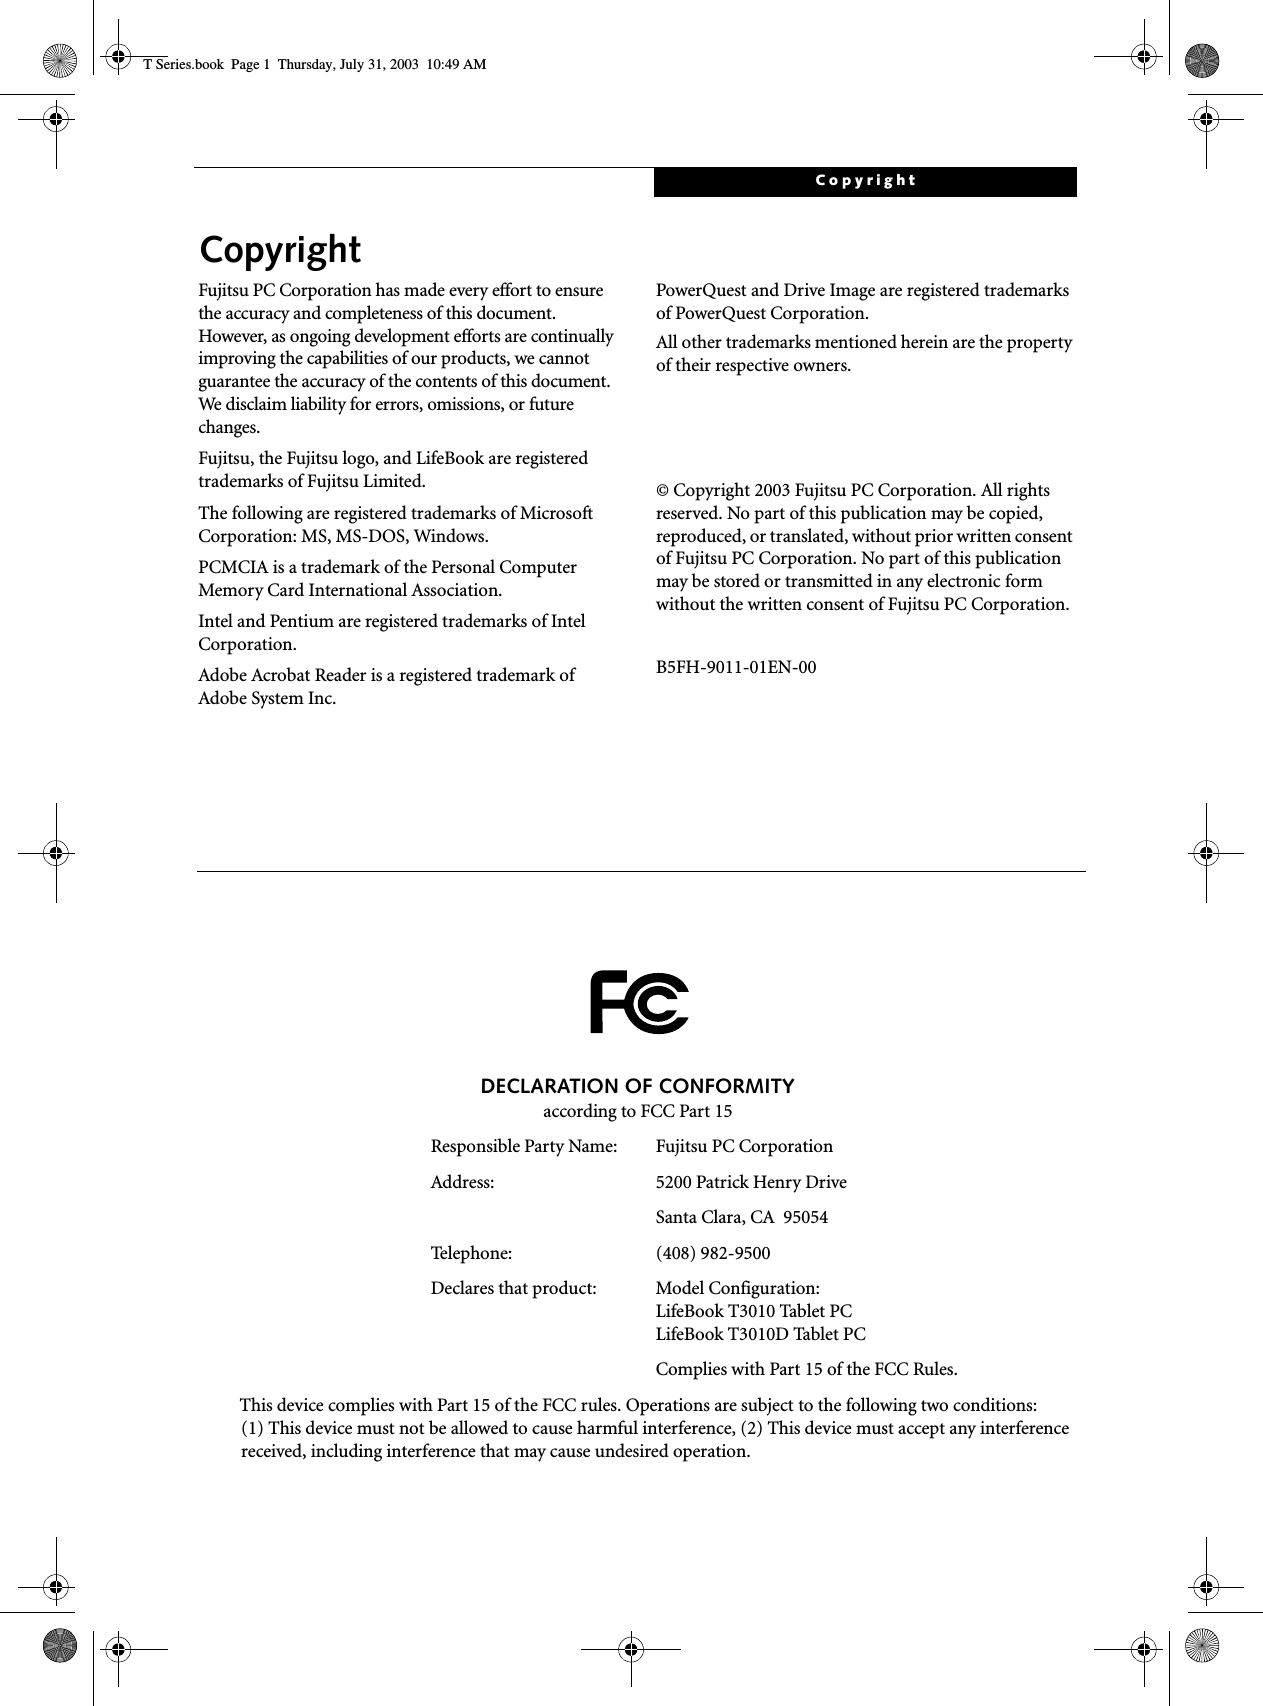 CopyrightCopyrightFujitsu PC Corporation has made every effort to ensure the accuracy and completeness of this document. However, as ongoing development efforts are continually improving the capabilities of our products, we cannot guarantee the accuracy of the contents of this document. We disclaim liability for errors, omissions, or future changes.Fujitsu, the Fujitsu logo, and LifeBook are registered trademarks of Fujitsu Limited.The following are registered trademarks of Microsoft Corporation: MS, MS-DOS, Windows.PCMCIA is a trademark of the Personal Computer Memory Card International Association.Intel and Pentium are registered trademarks of Intel Corporation.Adobe Acrobat Reader is a registered trademark of Adobe System Inc.PowerQuest and Drive Image are registered trademarks of PowerQuest Corporation.All other trademarks mentioned herein are the property of their respective owners.© Copyright 2003 Fujitsu PC Corporation. All rights reserved. No part of this publication may be copied, reproduced, or translated, without prior written consent of Fujitsu PC Corporation. No part of this publication may be stored or transmitted in any electronic form without the written consent of Fujitsu PC Corporation.B5FH-9011-01EN-00DECLARATION OF CONFORMITYaccording to FCC Part 15Responsible Party Name: Fujitsu PC CorporationAddress:  5200 Patrick Henry DriveSanta Clara, CA  95054Telephone: (408) 982-9500Declares that product: Model Configuration:LifeBook T3010 Tablet PC LifeBook T3010D Tablet PCComplies with Part 15 of the FCC Rules.This device complies with Part 15 of the FCC rules. Operations are subject to the following two conditions:(1) This device must not be allowed to cause harmful interference, (2) This device must accept any interference received, including interference that may cause undesired operation.T Series.book  Page 1  Thursday, July 31, 2003  10:49 AM